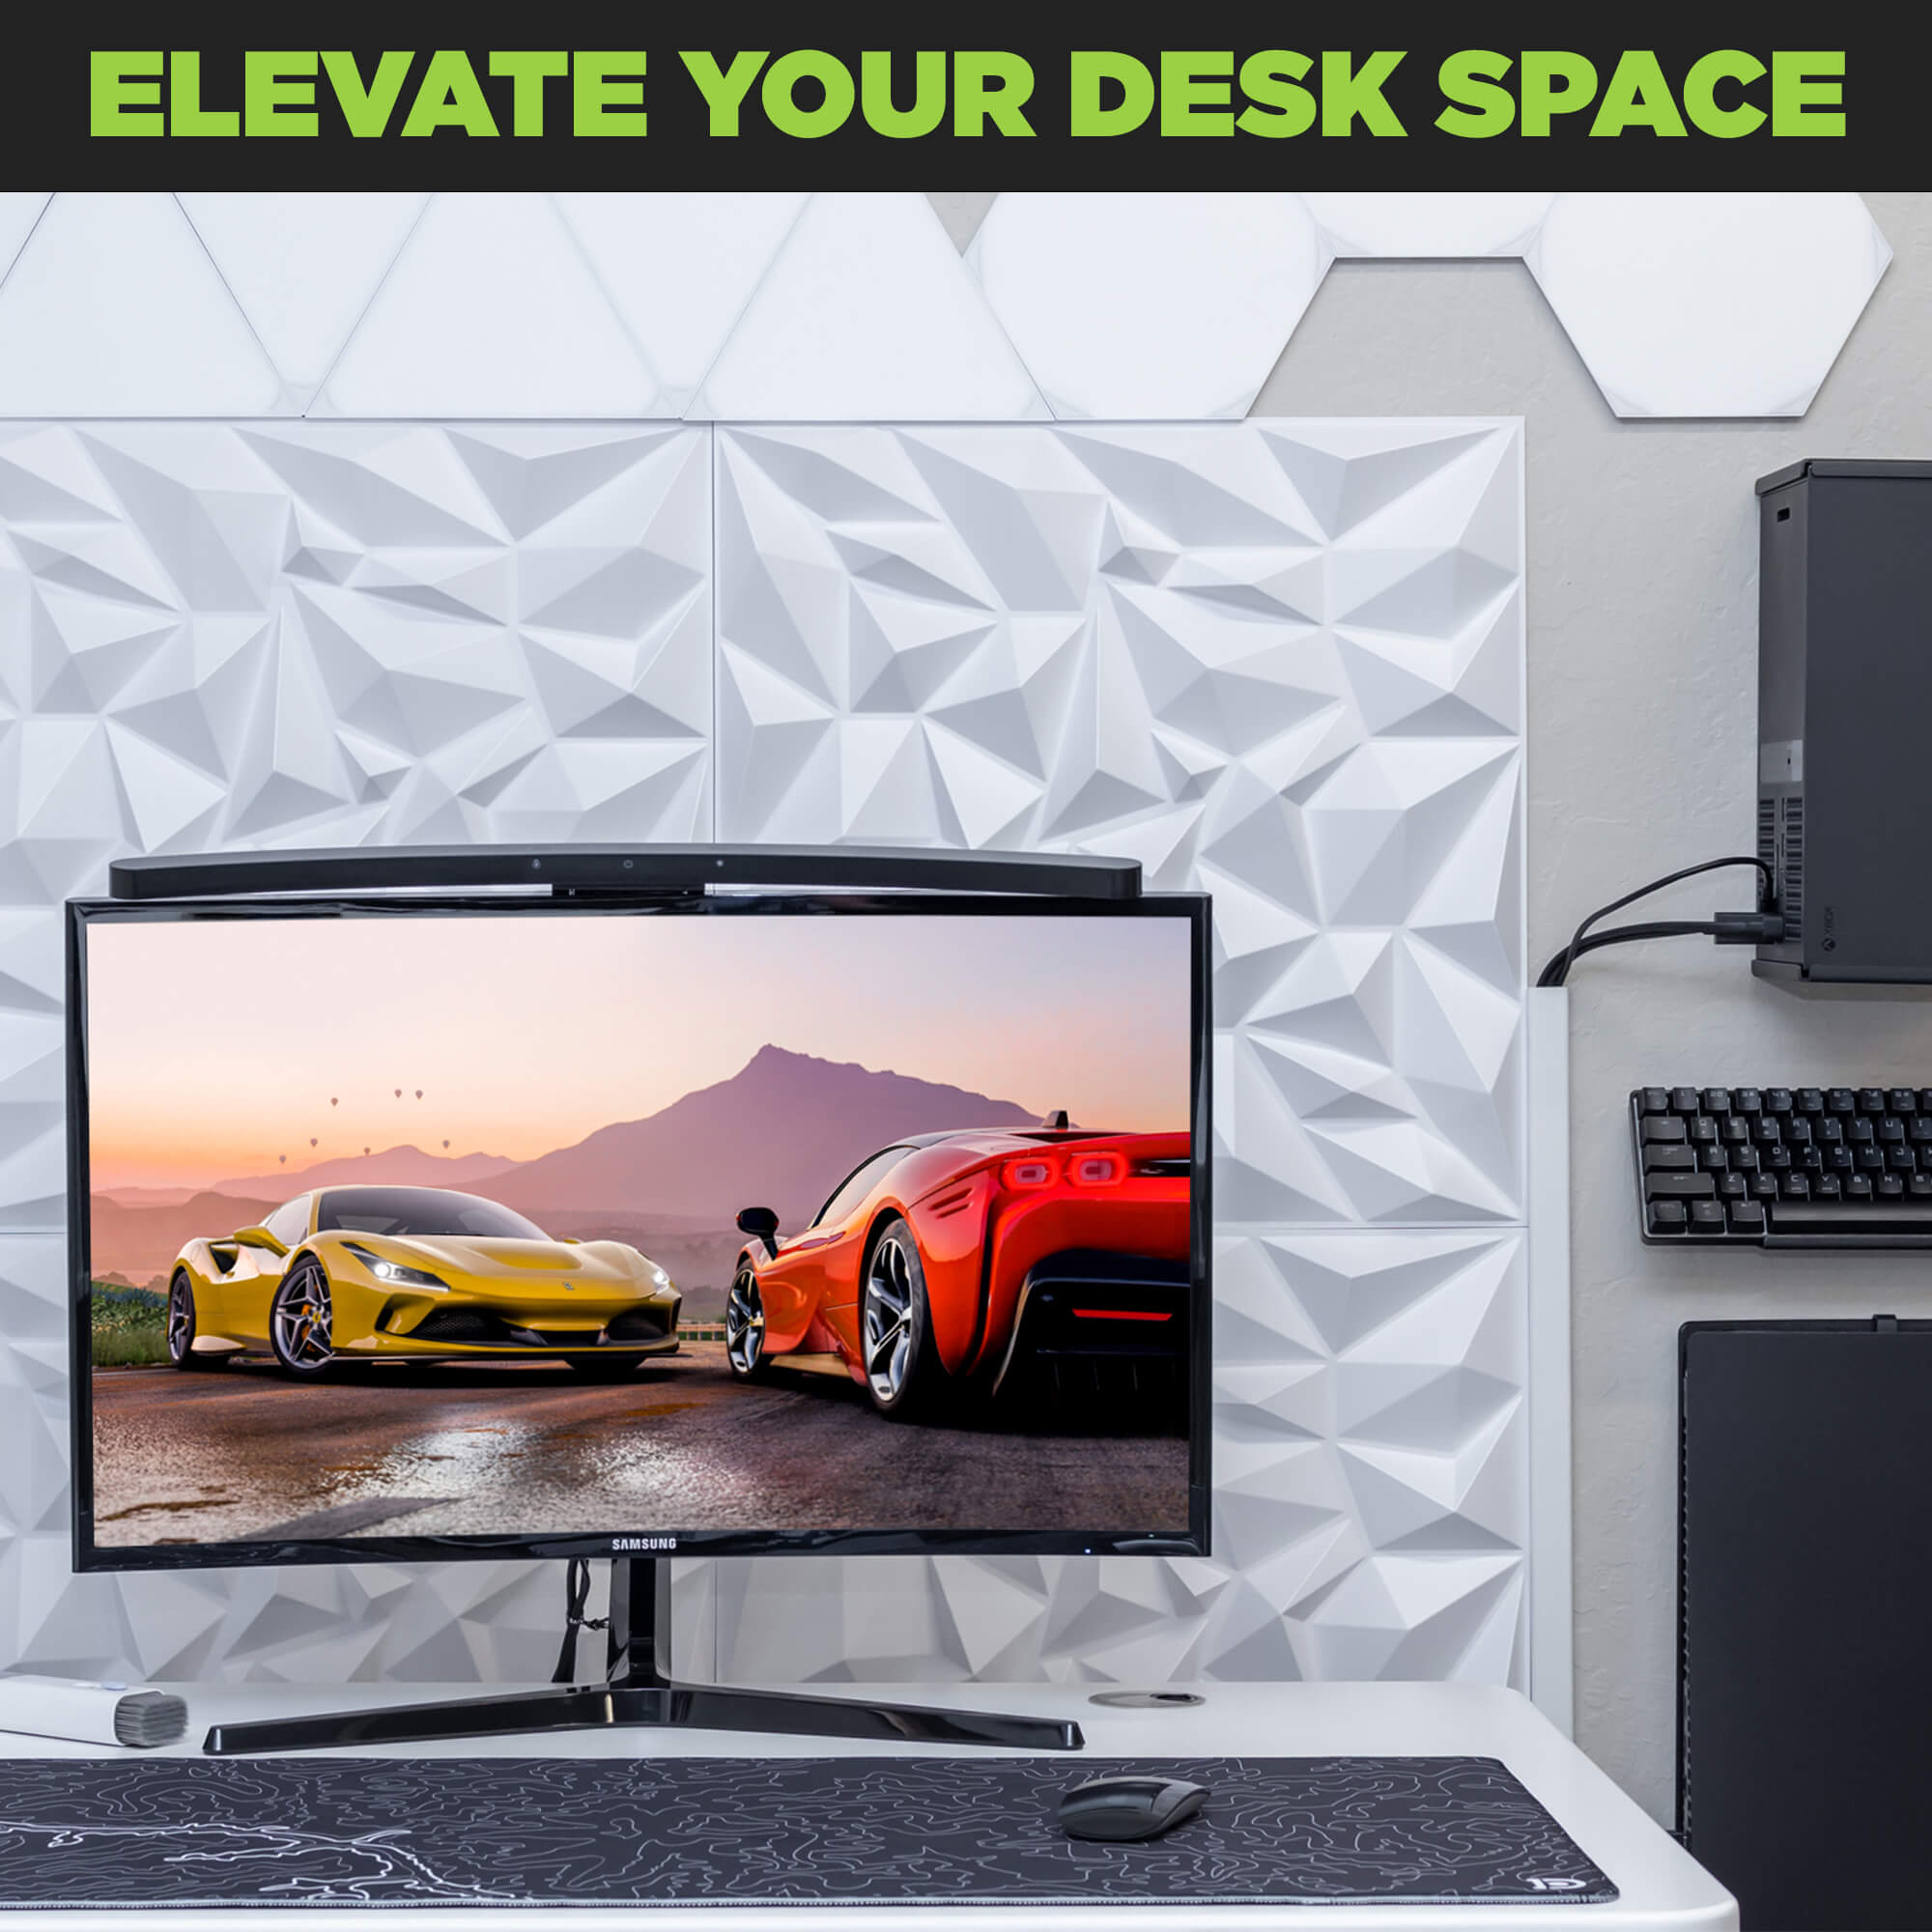 Topo Canyon Deskpad by Deskr is available in black.